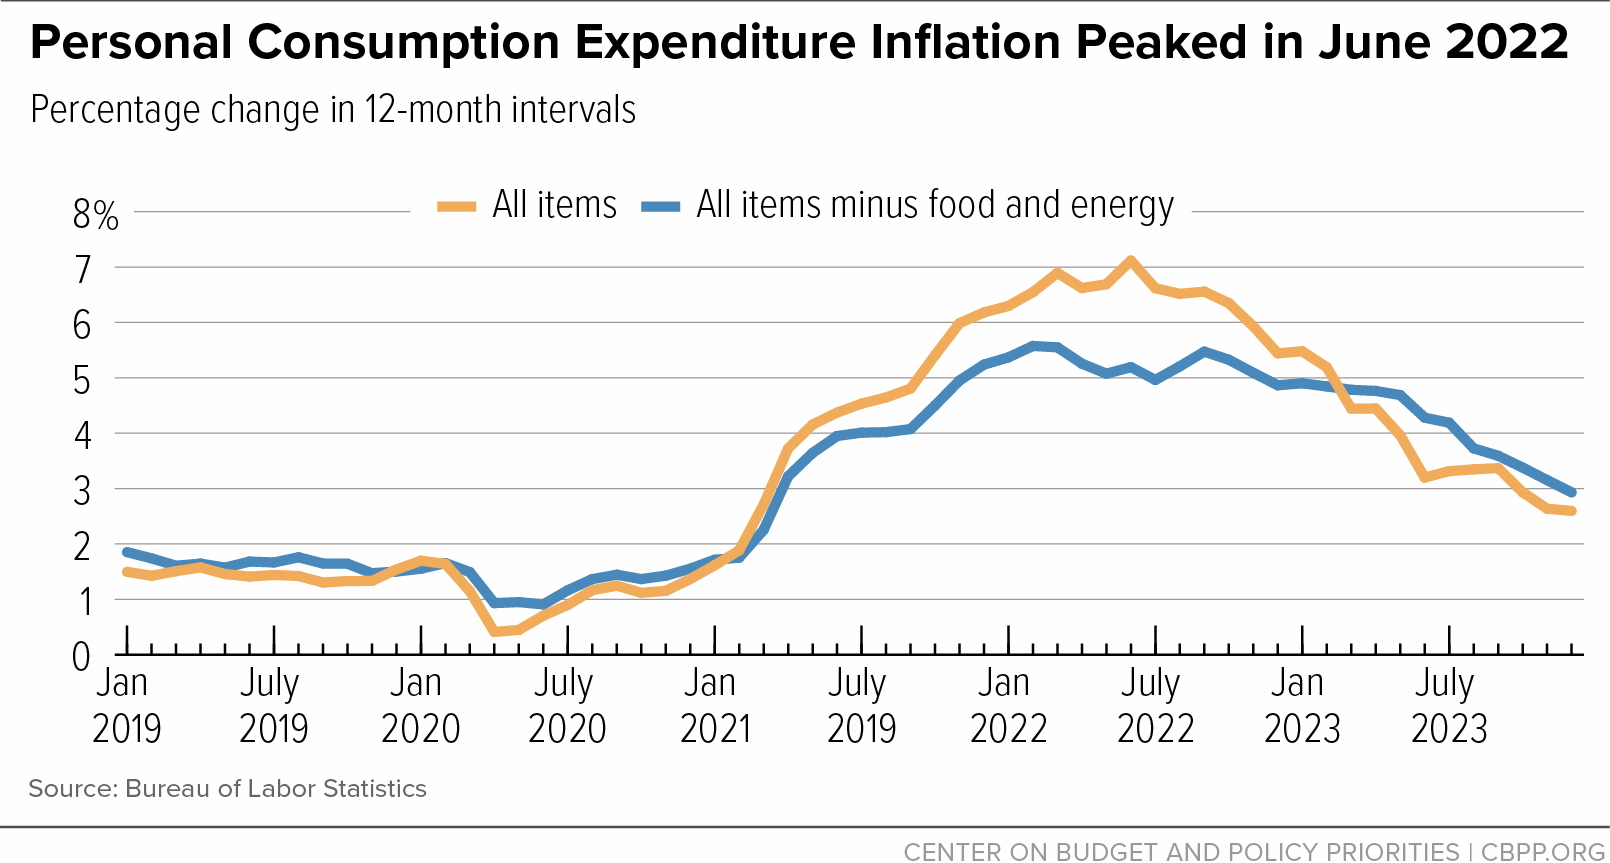 Personal Consumption Expenditure Inflation Peaked in June 2022